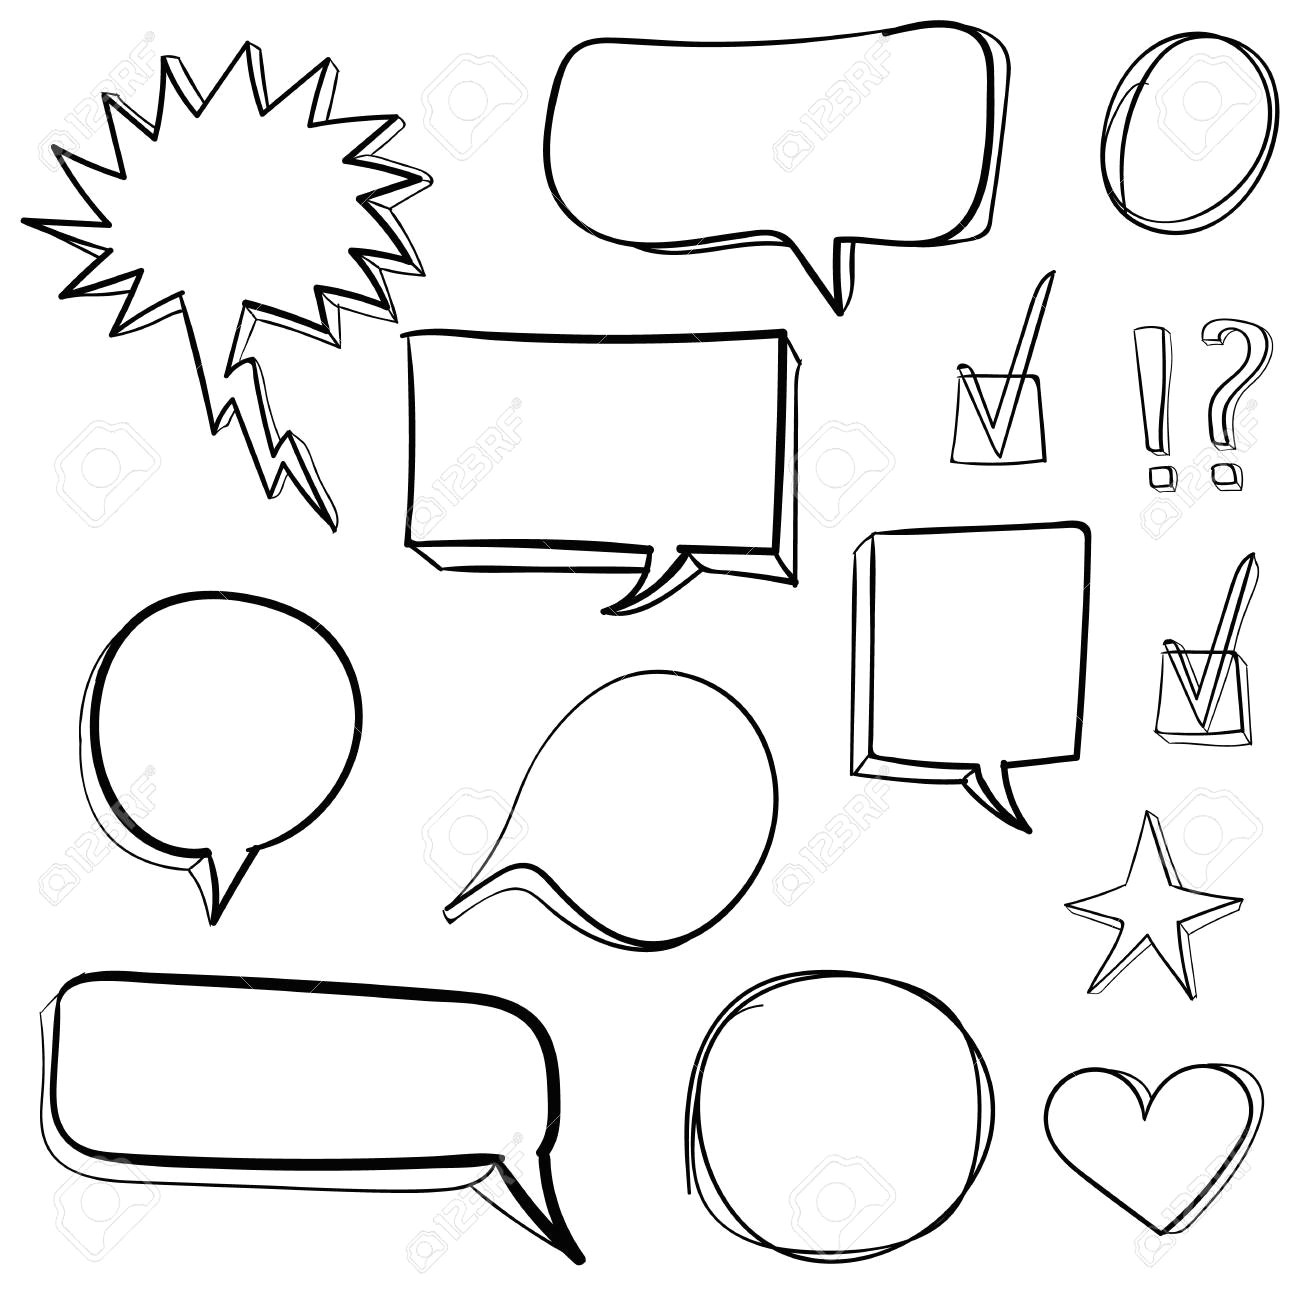 A Drawing Of the Heart and Labeled Set Od 3d Hand Drawn Icons Check Mark Star Heart Speech Bubbles